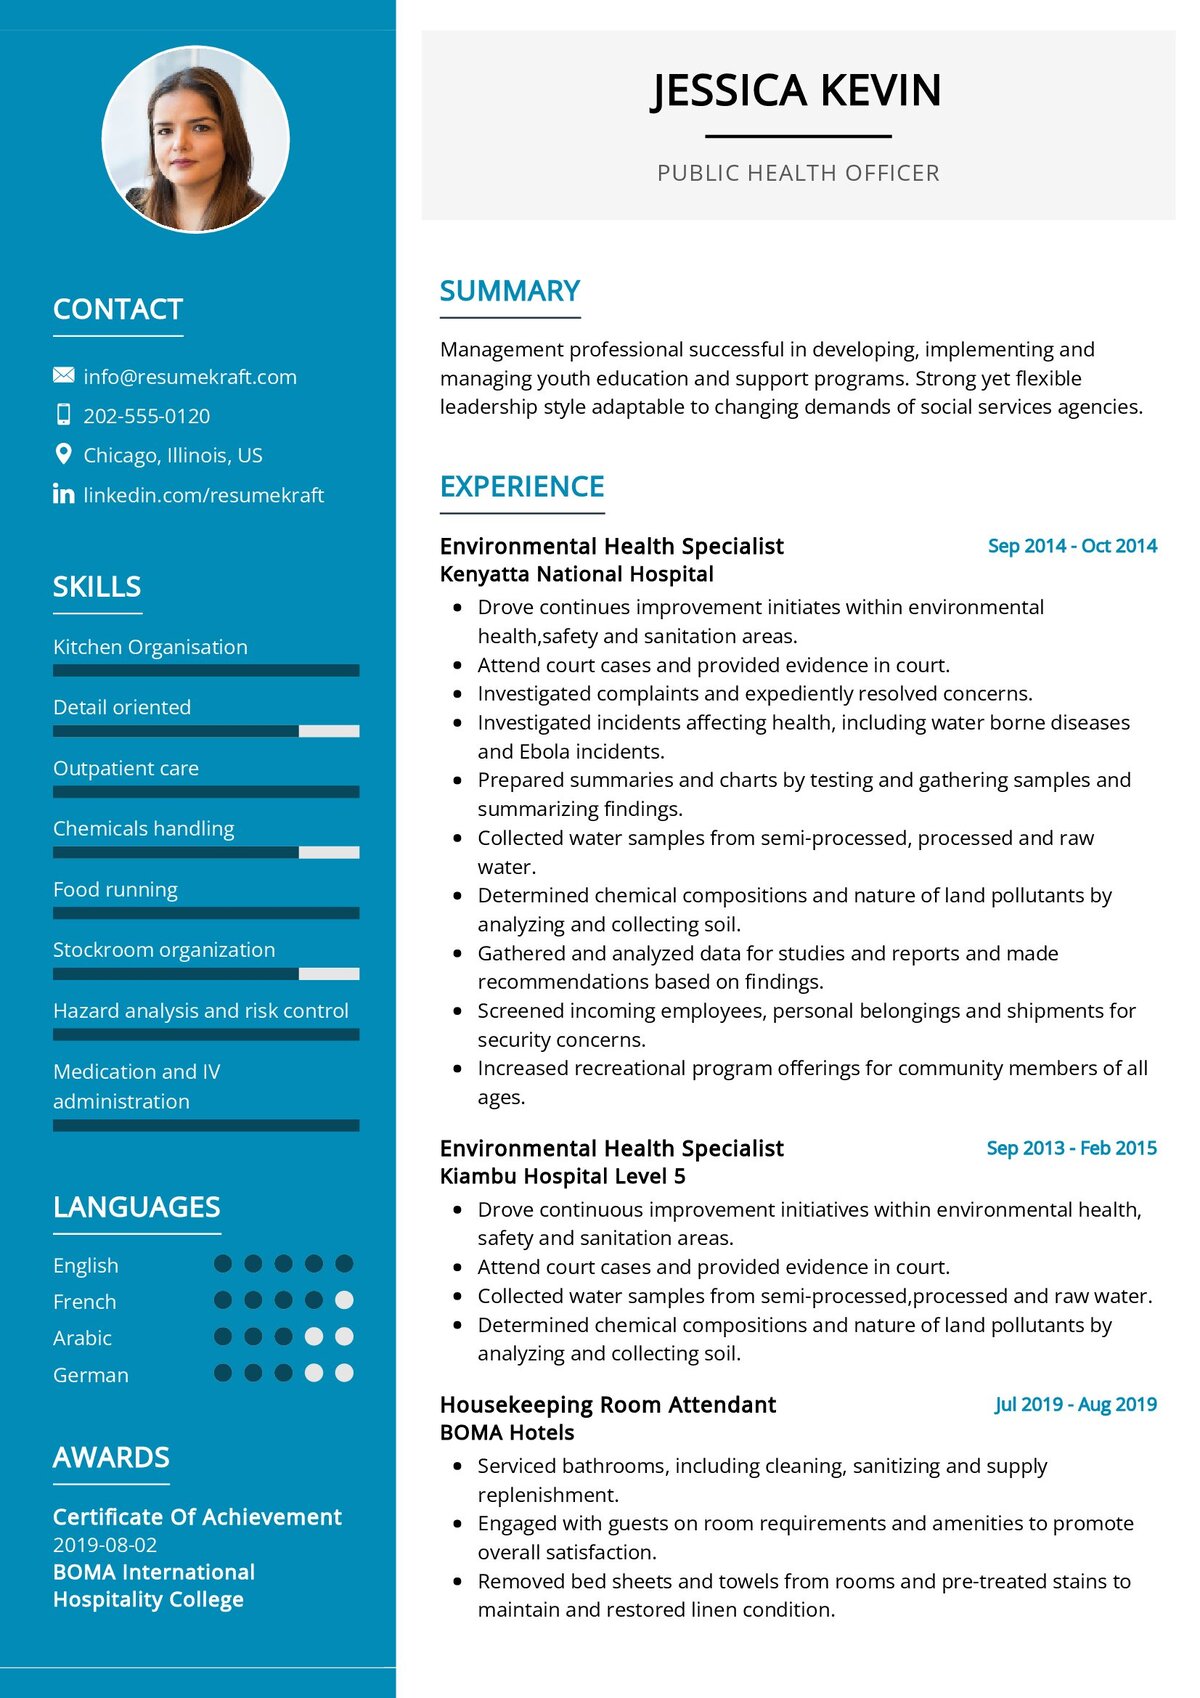 Public Health Officer Resume Template